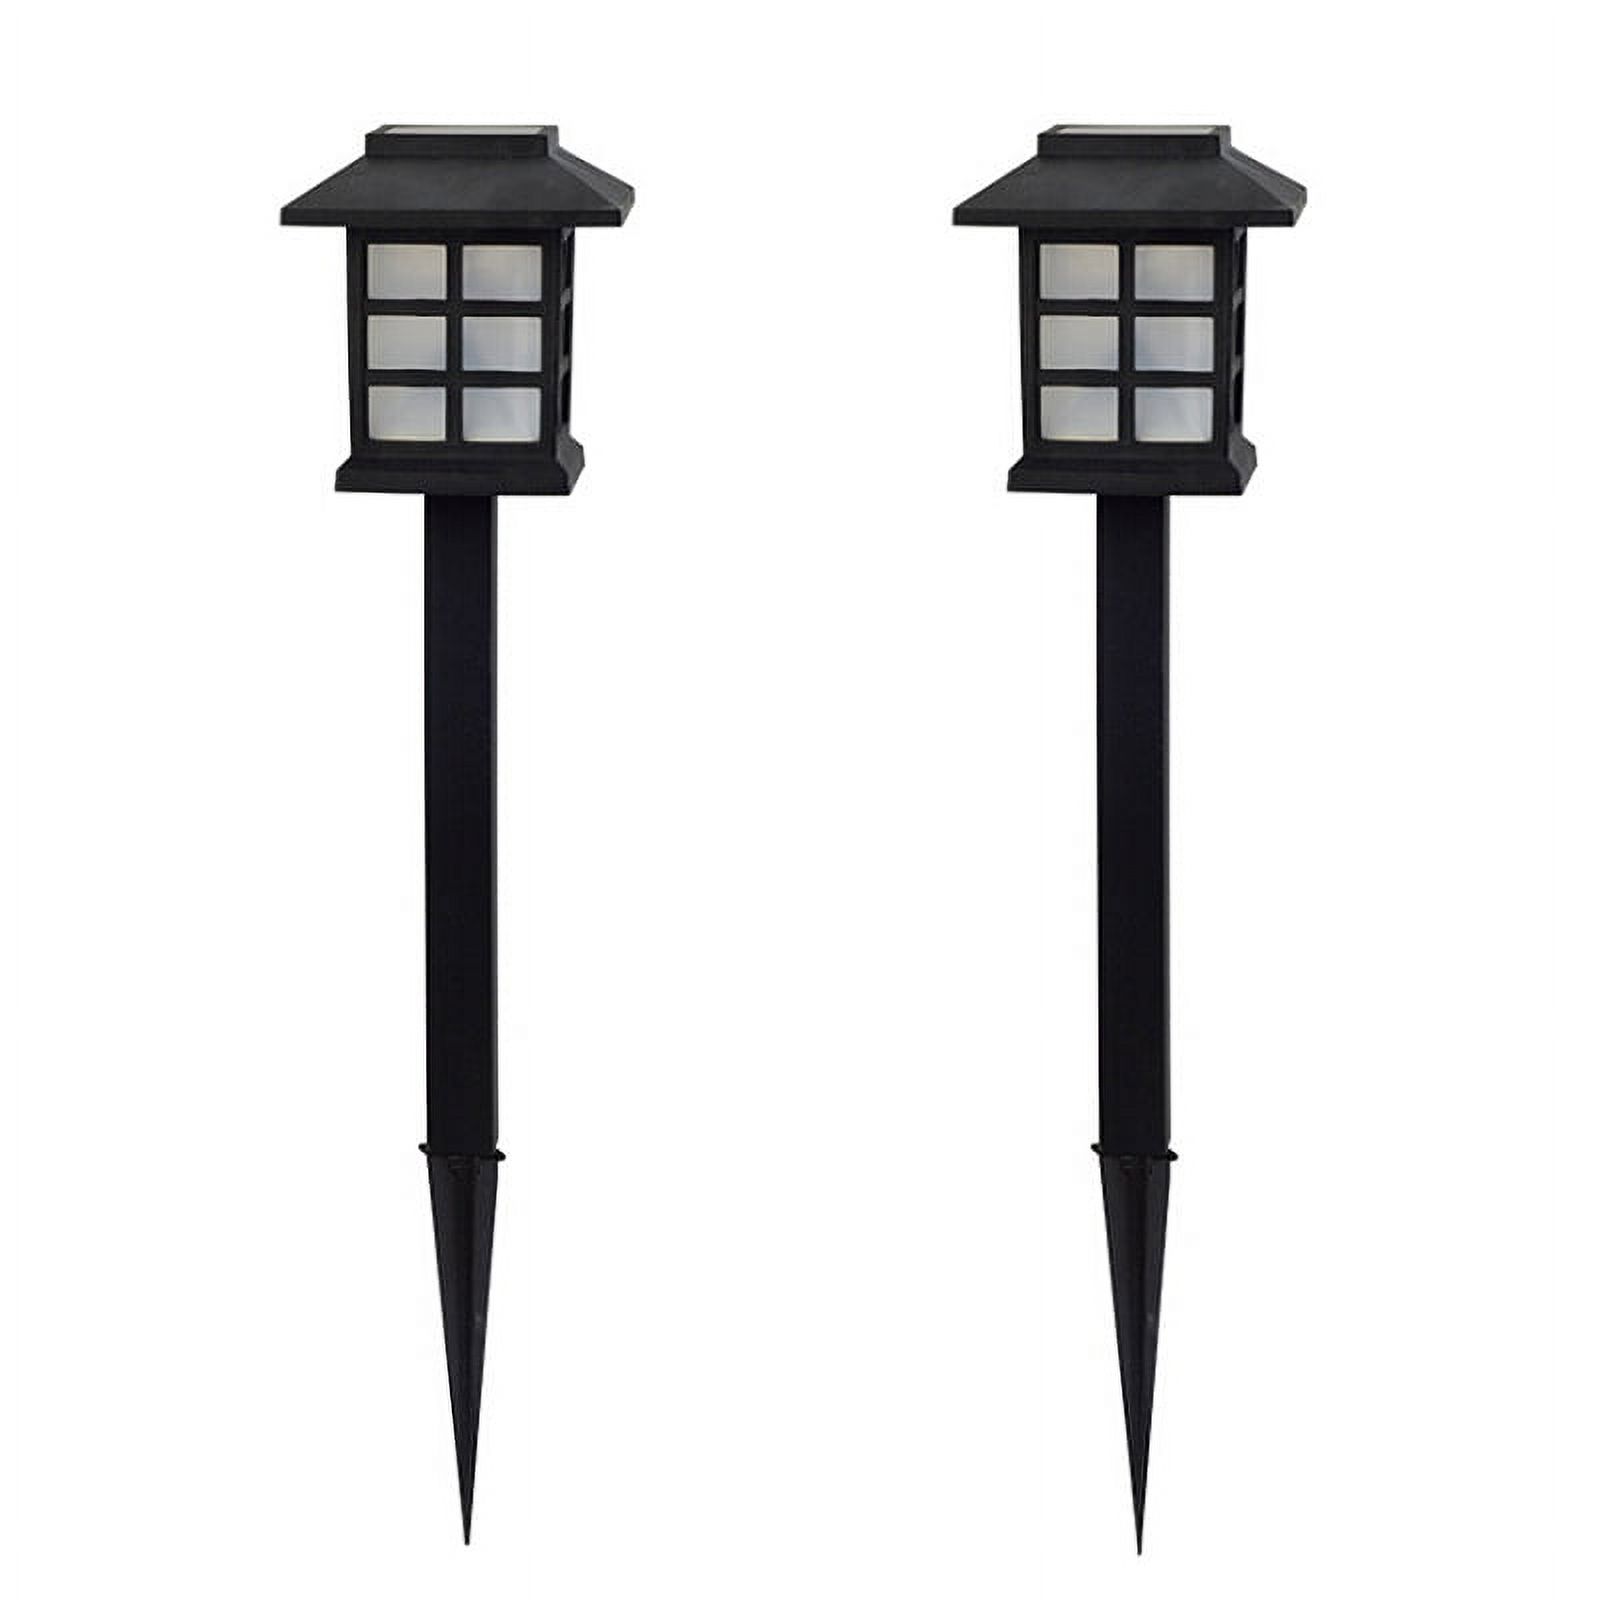 2 Pcs Solar Pathway Lights Outdoor LED Solar Powered Garden Lights for Lawn Patio Yard;2 Pcs Solar Pathway Lights Outdoor LED Solar Powered Garden Lights - image 1 of 9